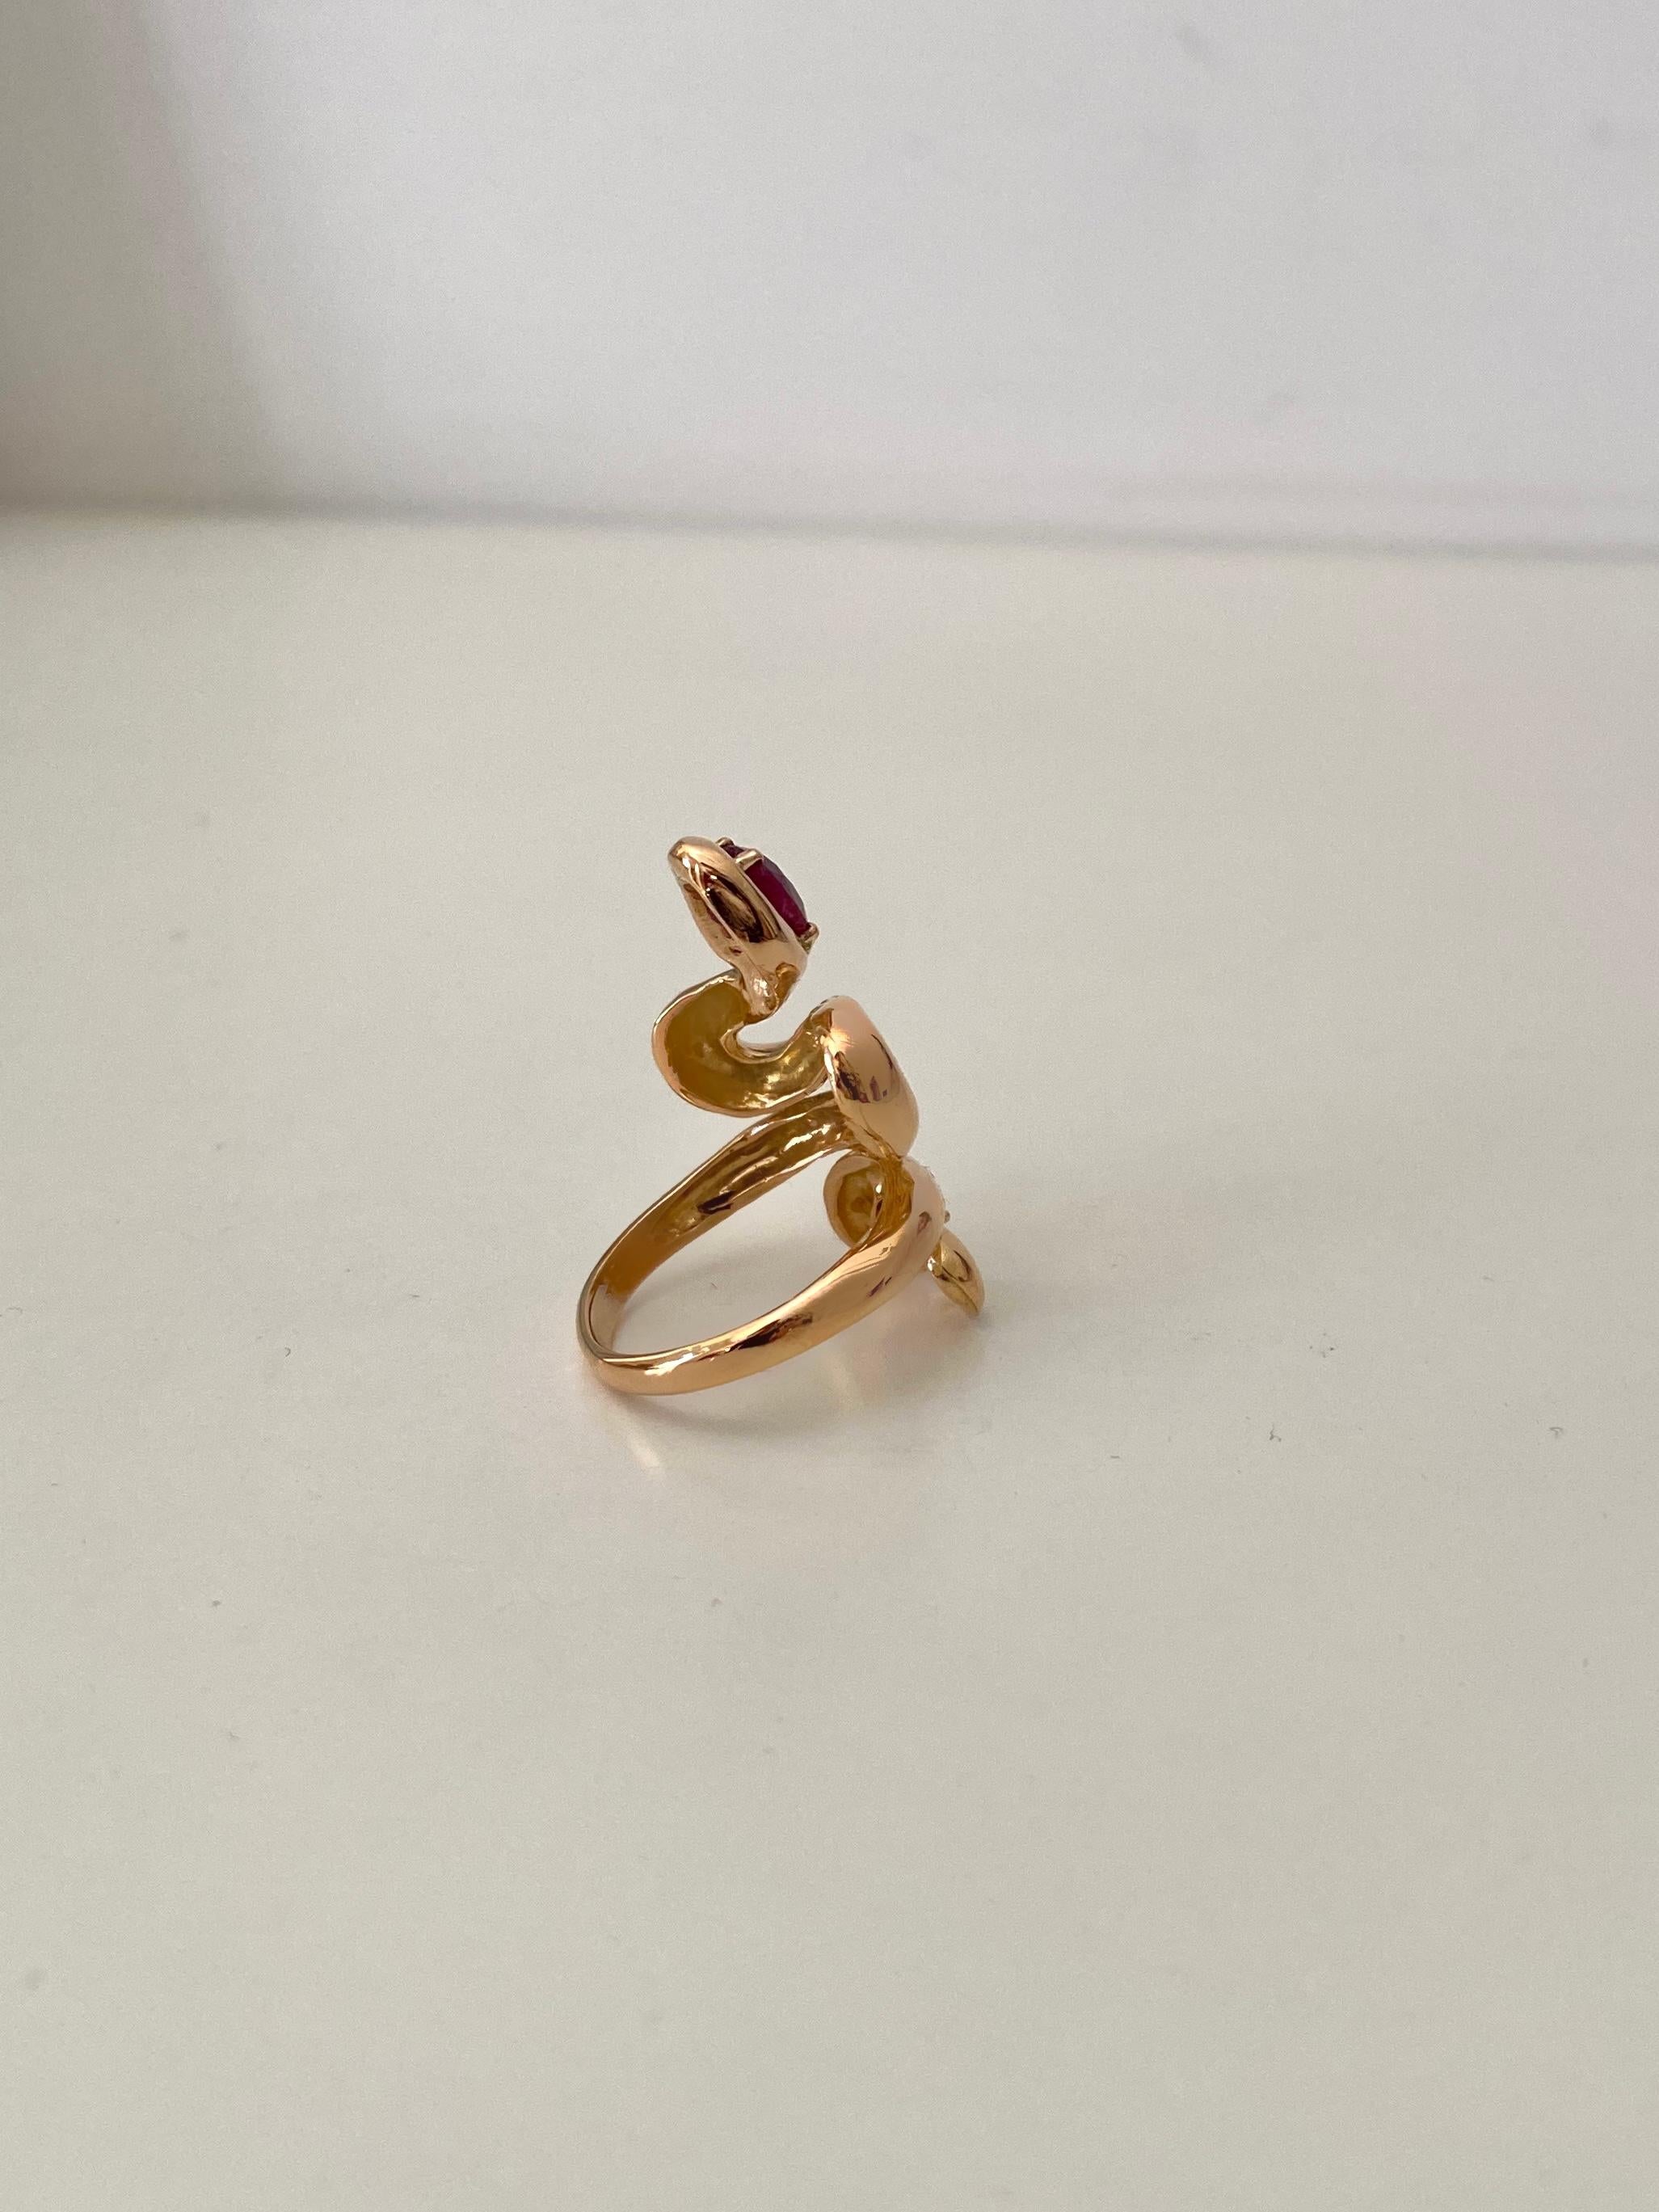 18K Yellow Gold Snake Bold Unisex Ring with Ruby Diamond Rossella Ugolini Design For Sale 5